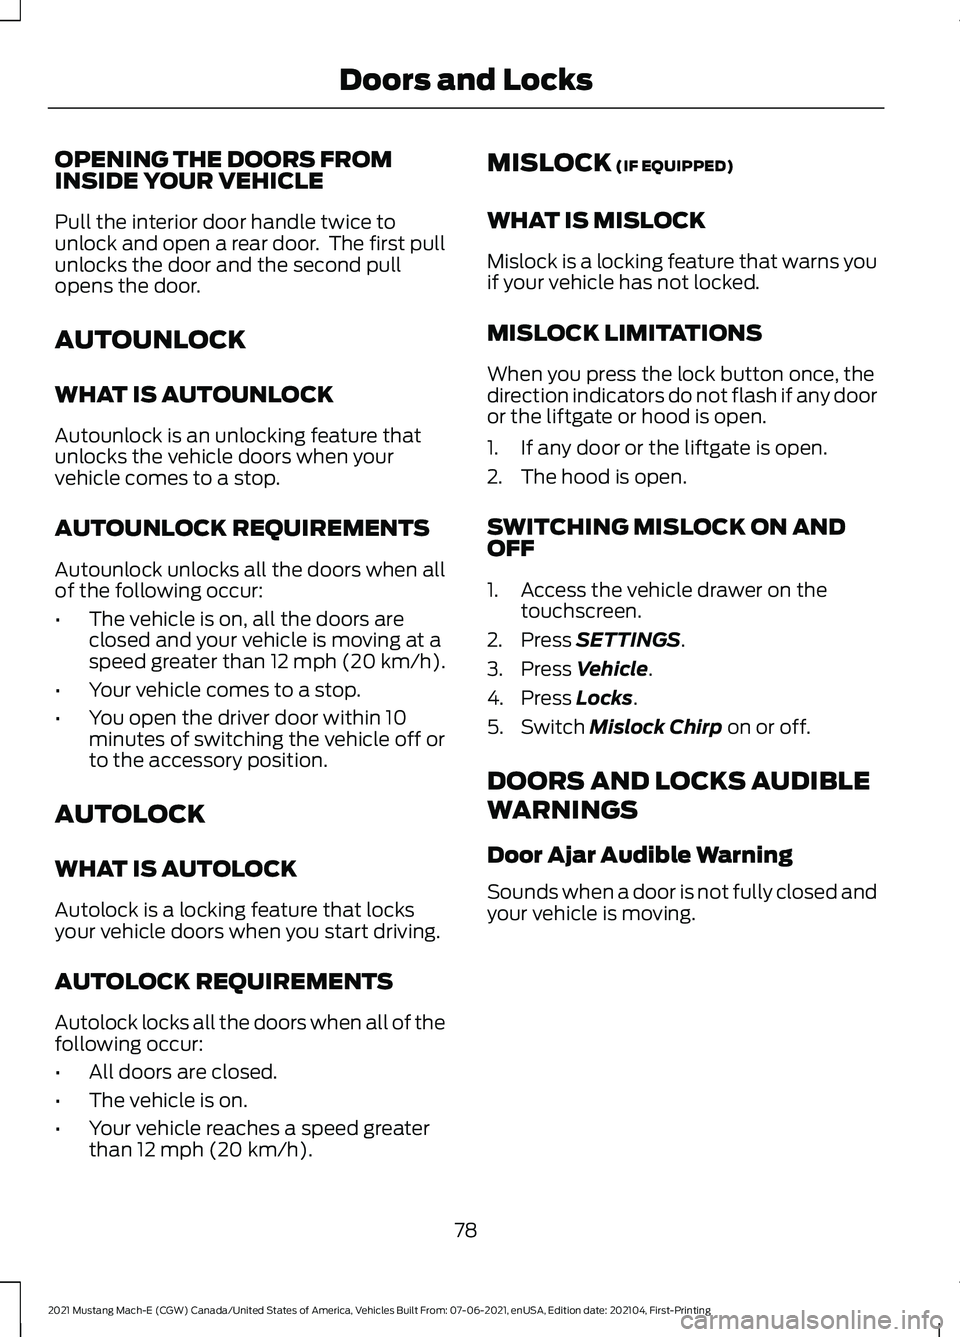 FORD MUSTANG MACH-E 2021 Owners Guide OPENING THE DOORS FROM
INSIDE YOUR VEHICLE
Pull the interior door handle twice to
unlock and open a rear door.  The first pull
unlocks the door and the second pull
opens the door.
AUTOUNLOCK
WHAT IS A